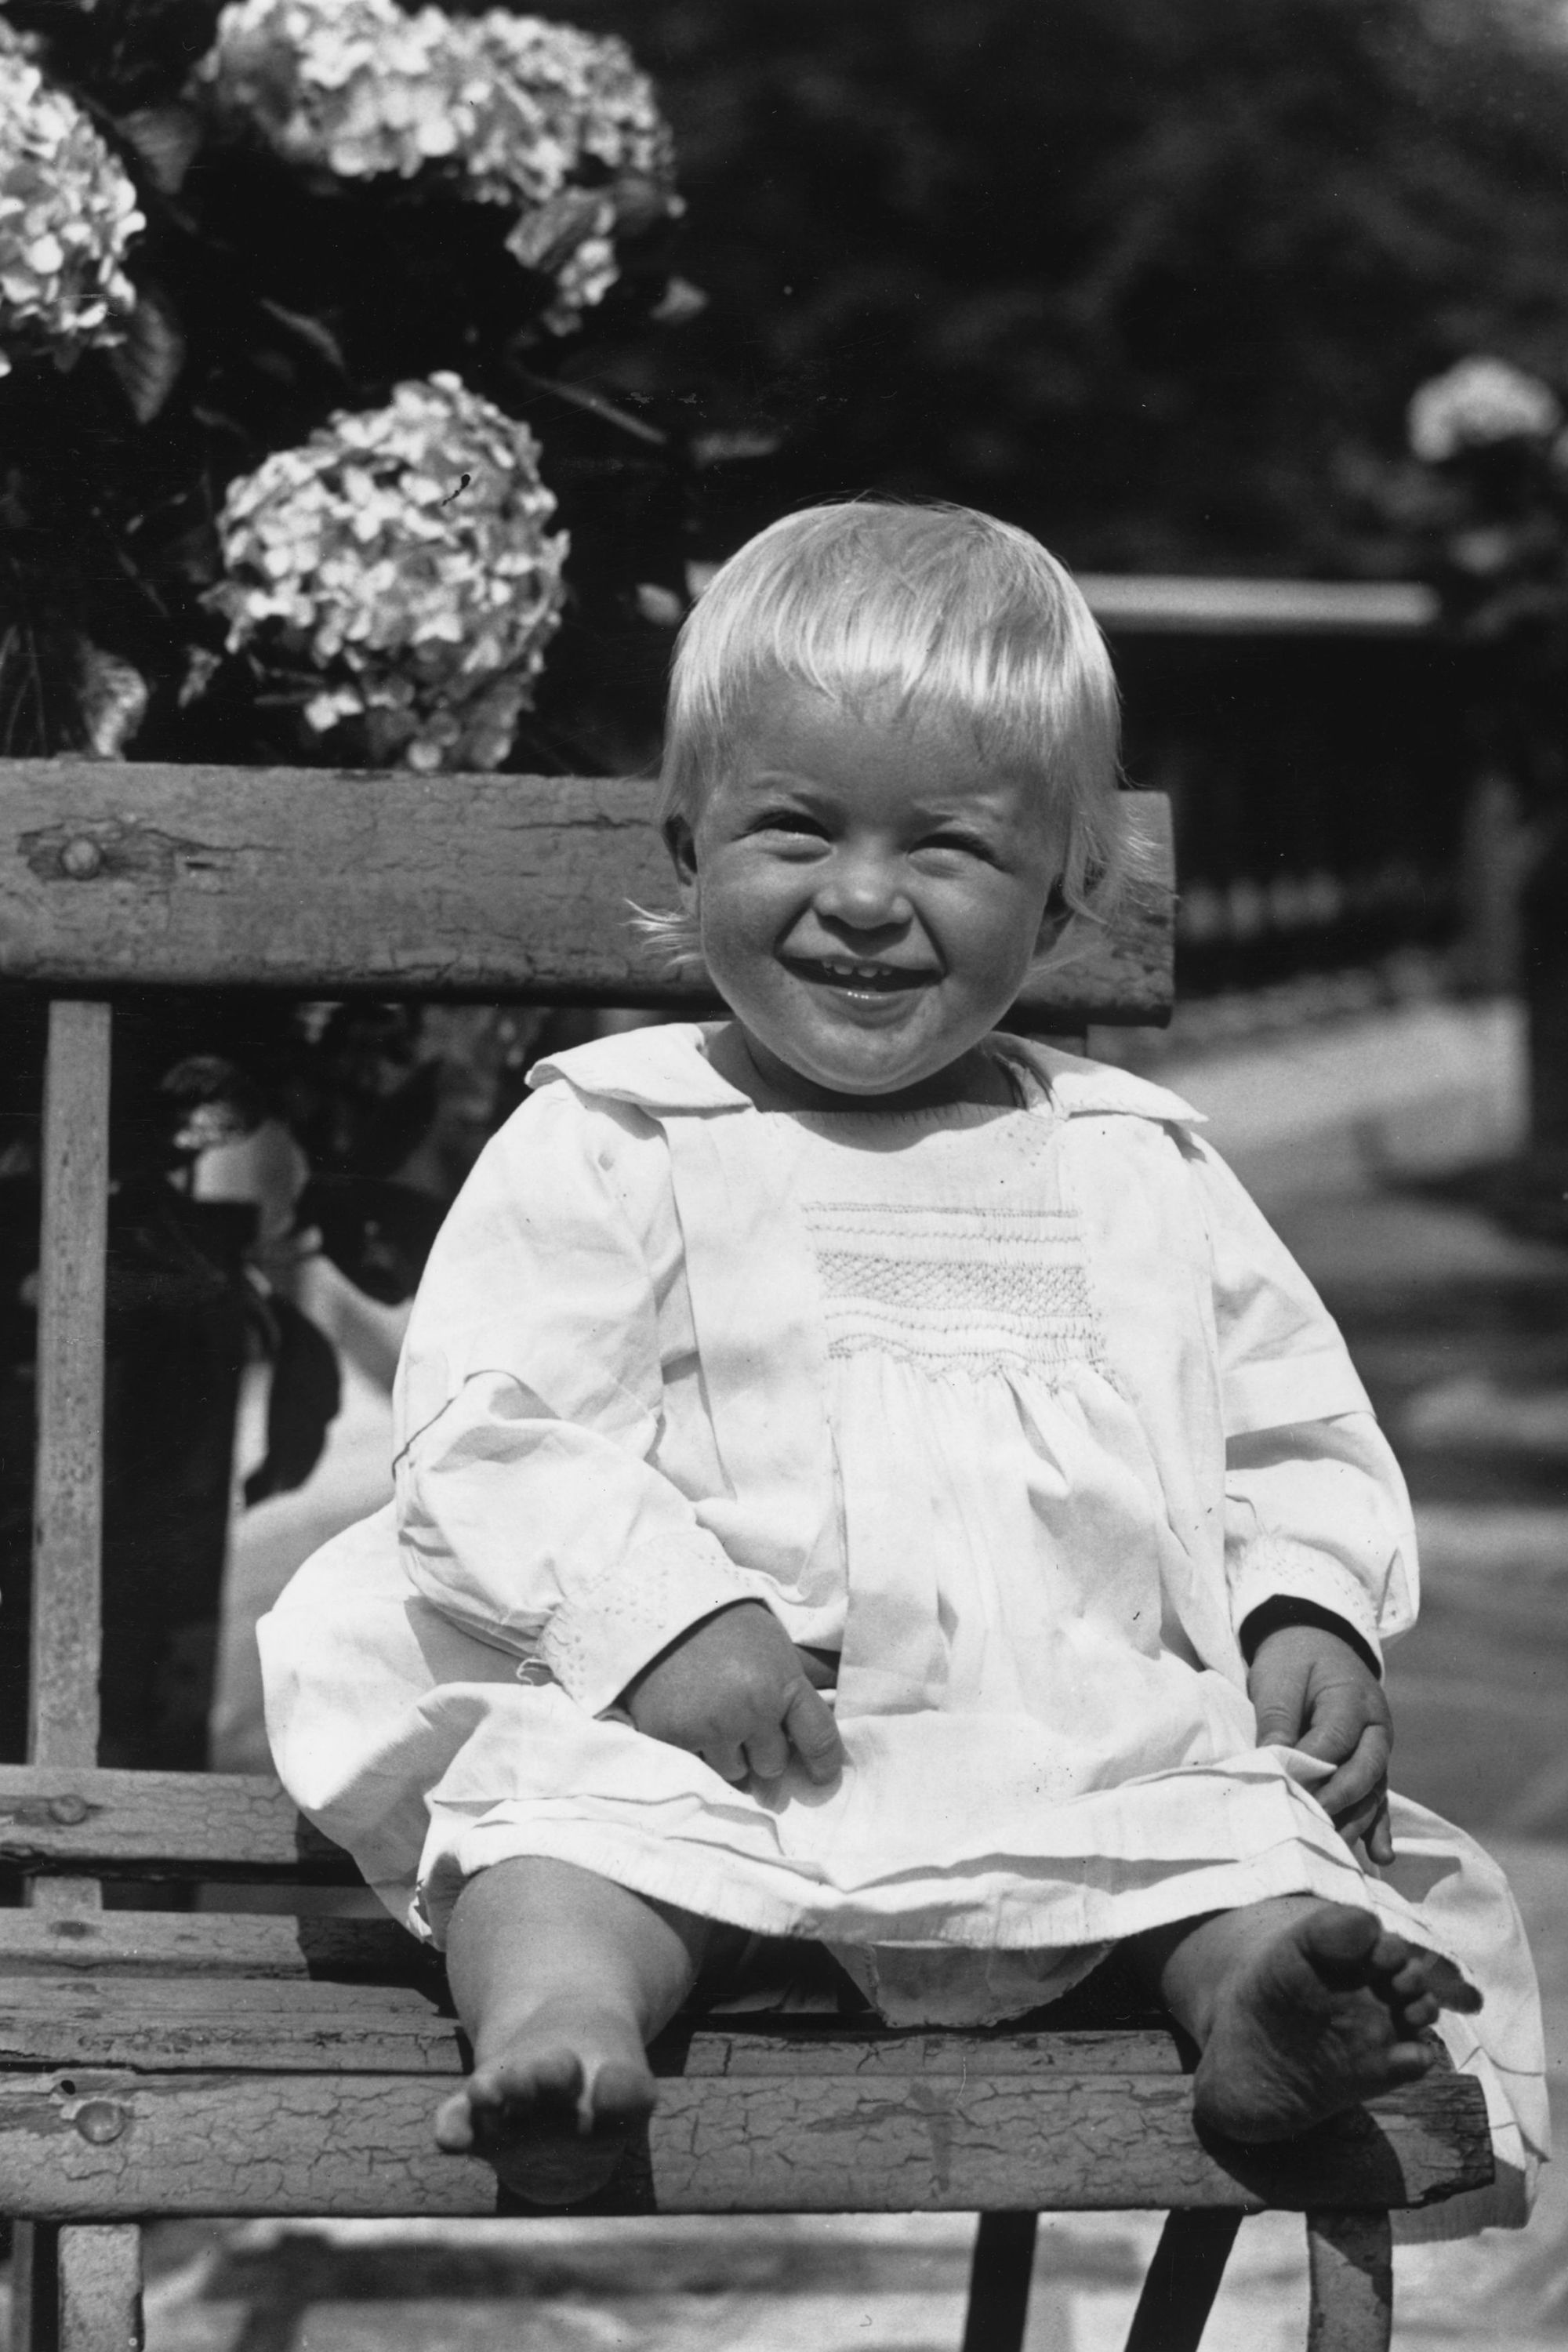 prince philip of greece, later duke of edinburgh, as a toddler, july 1922 photo by hulton archivegetty images